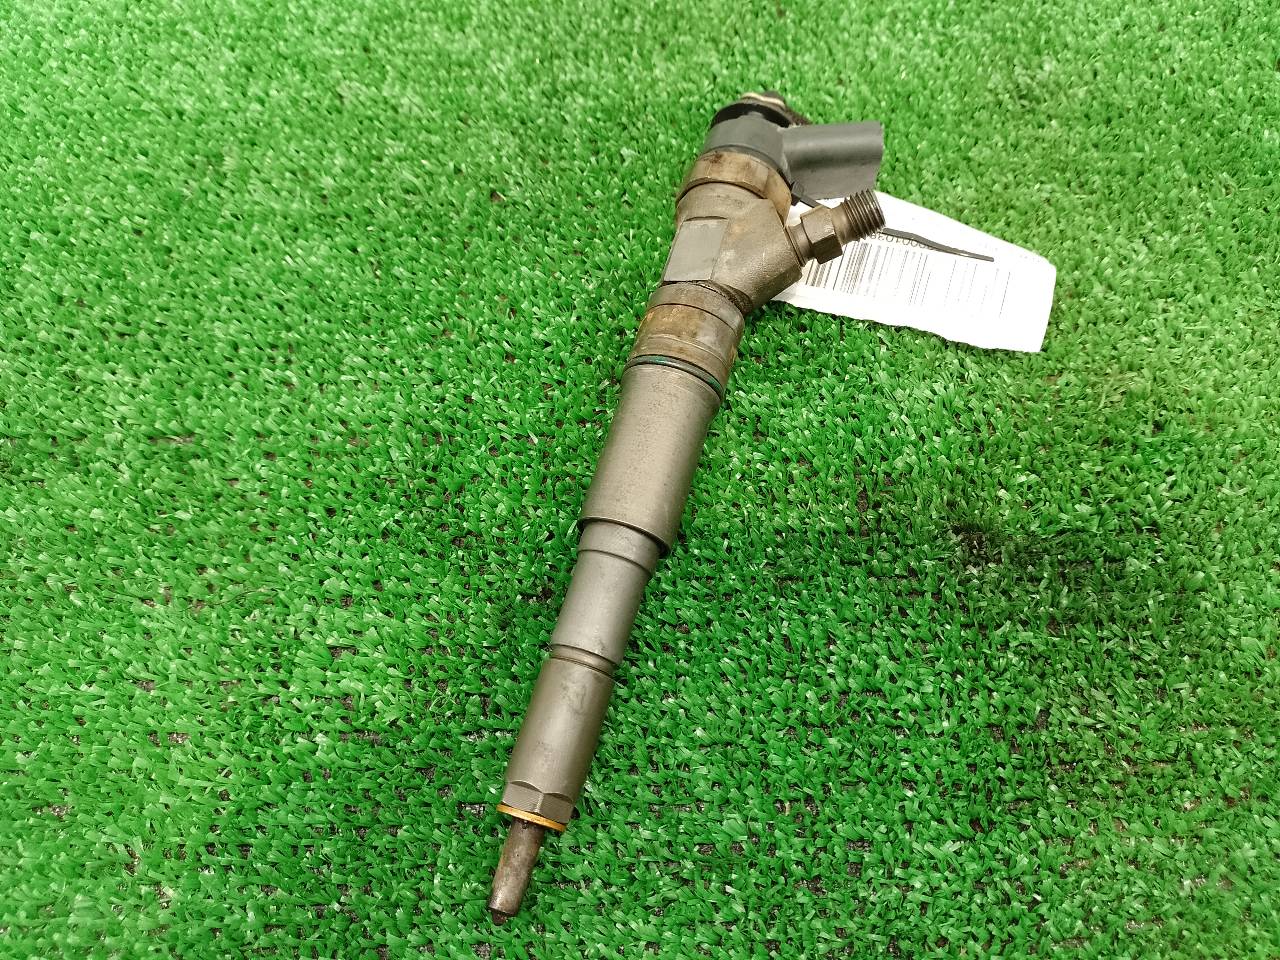 BMW 3 Series E46 (1997-2006) Fuel Injector 0445110080, 7788609 23709119